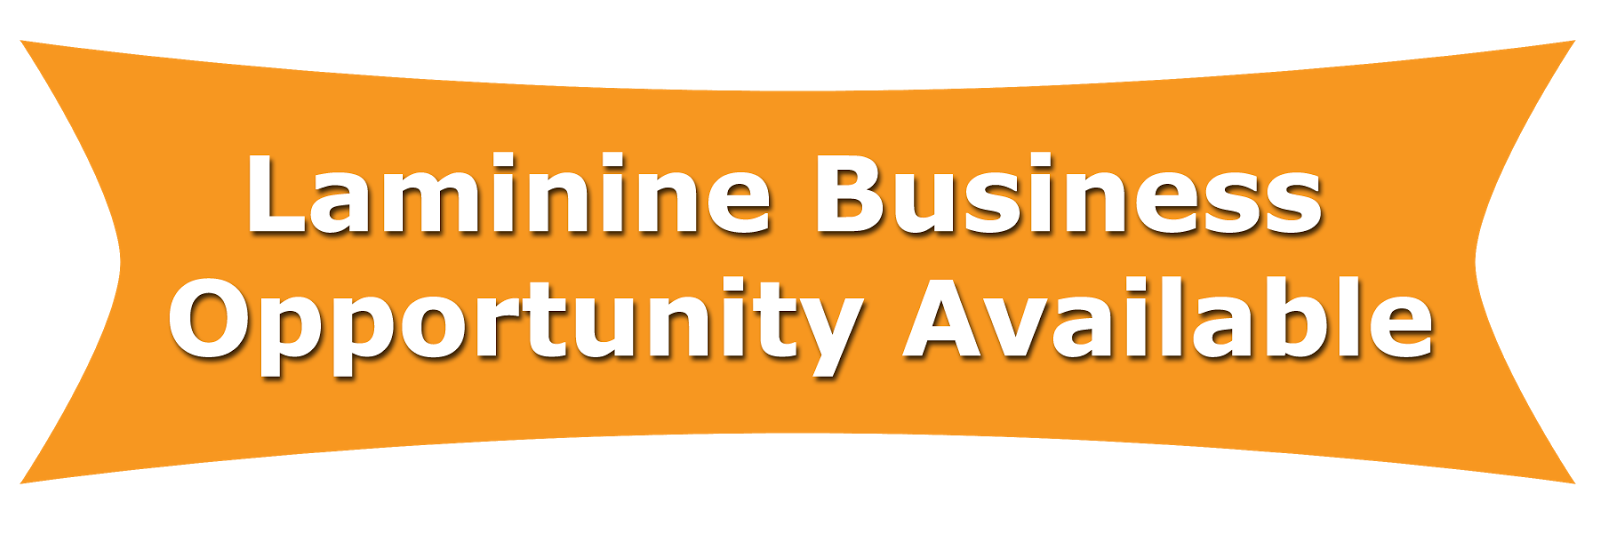  Laminine Business Opportunity Available